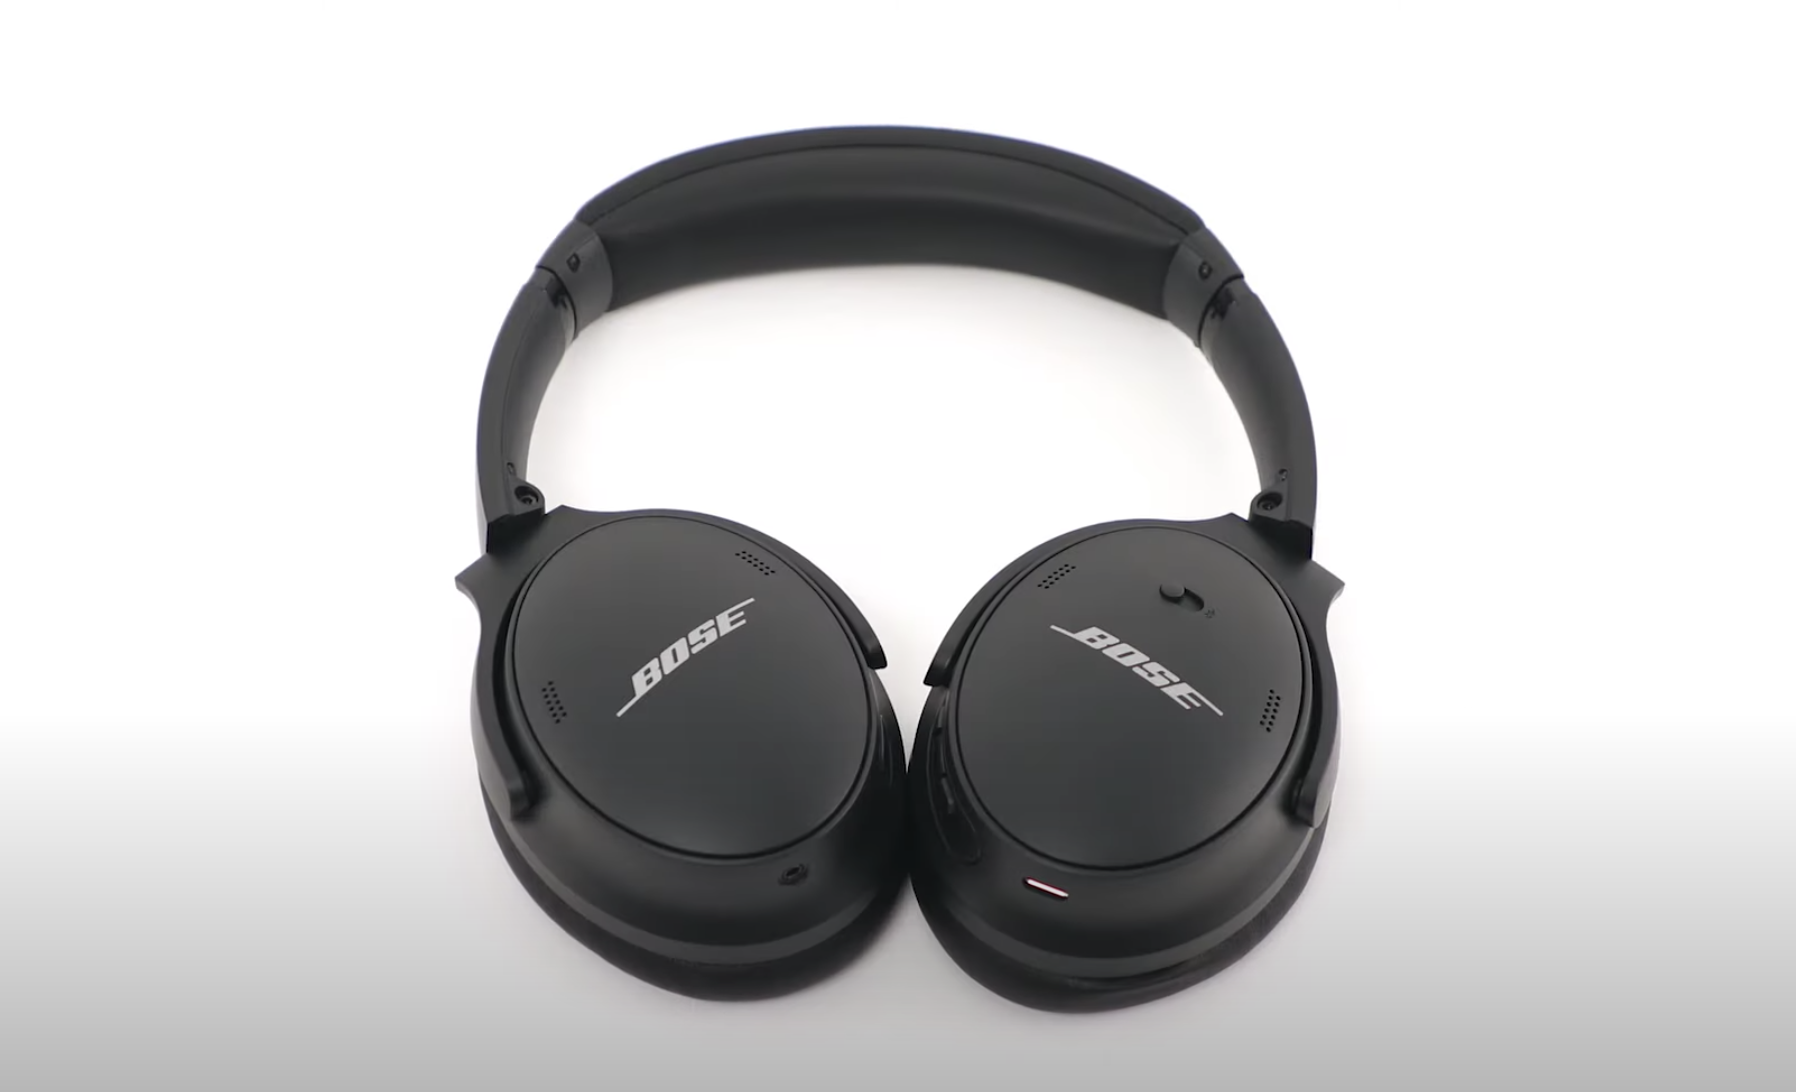 Bose QuietComfort SE wireless headphones spotted – could they